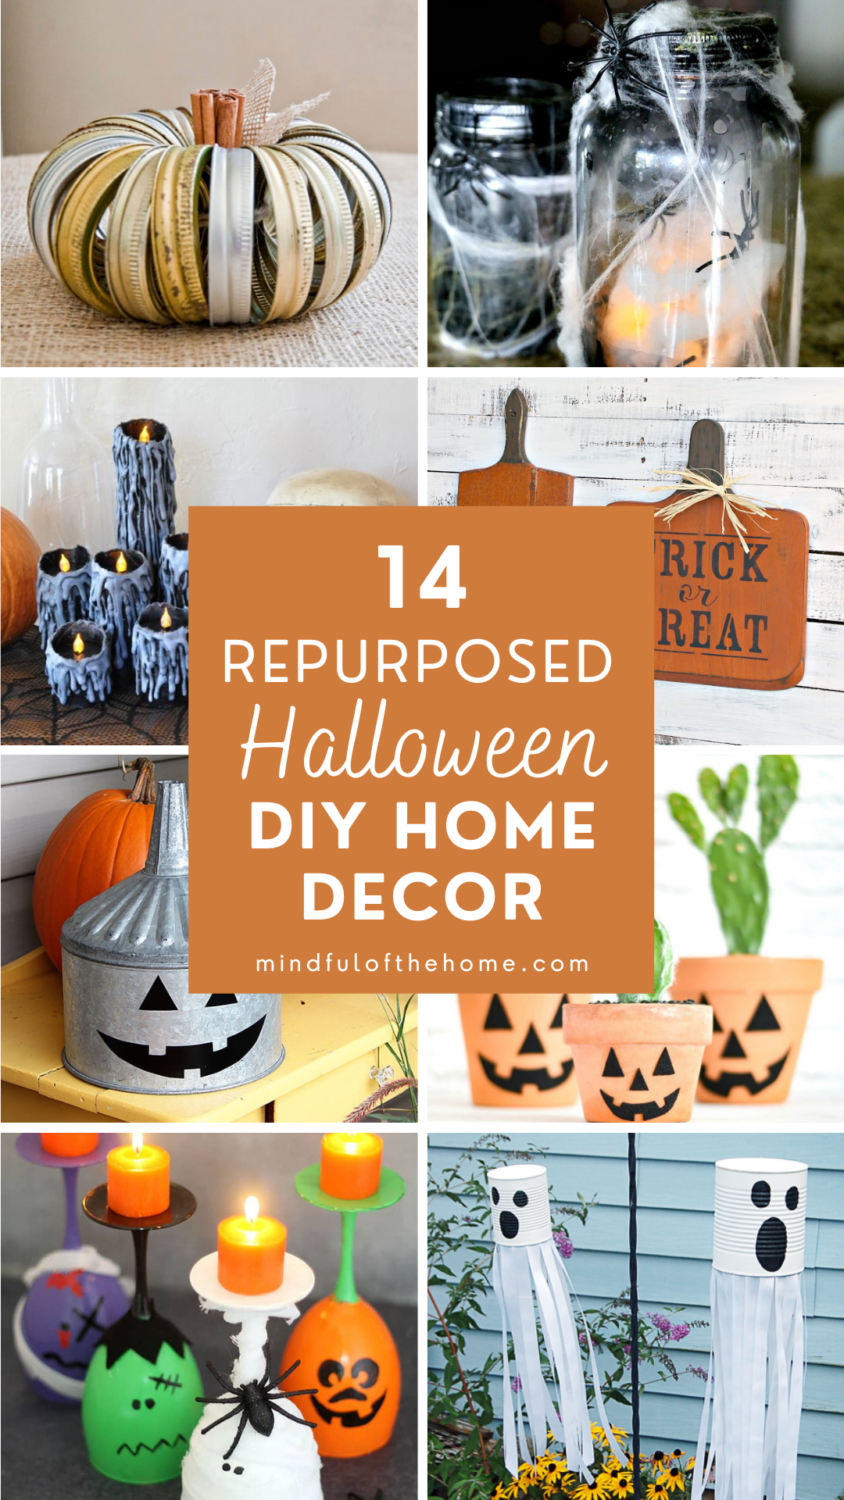 Upcycle Plastic Bags For Home Decor - Rustic Crafts & DIY